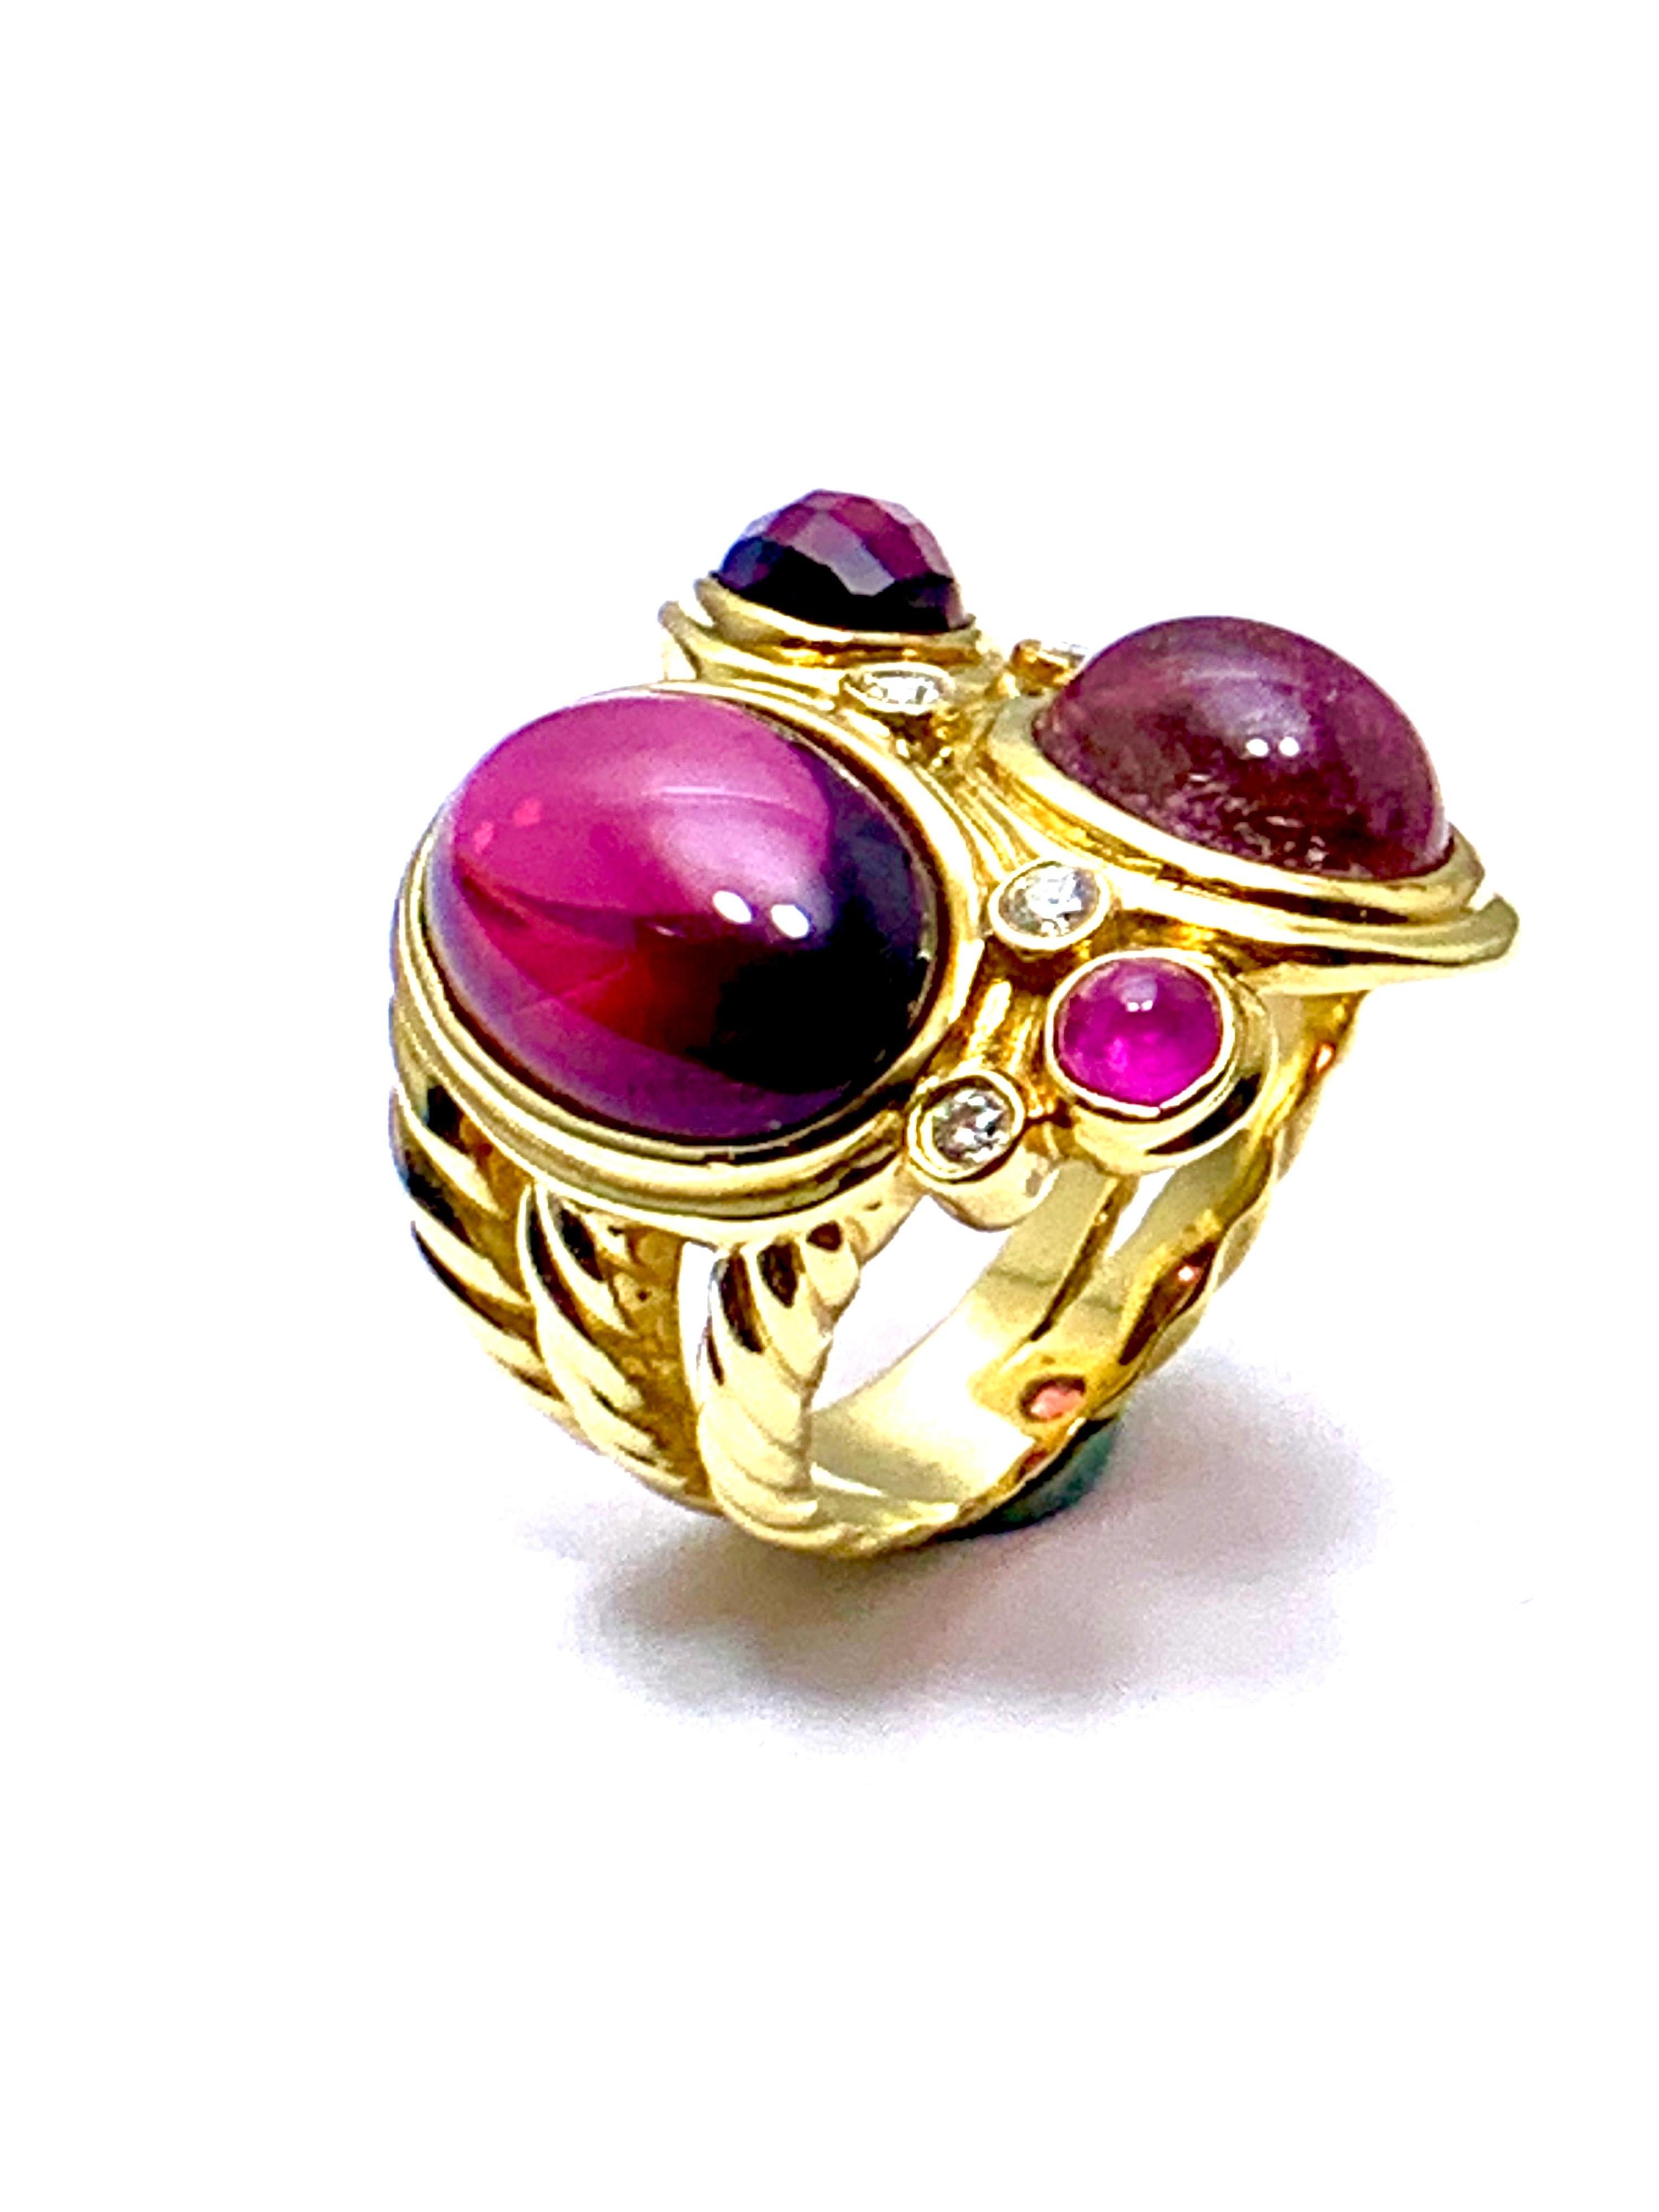 An estate David Yurman 18K yellow gold mosaic ring with Rhodolite Garnet, Pink Tourmaline and round brilliant-cut Diamonds.  The Diamonds are 0.15 total carat weight, G-H color, VS1-2 clarity.  The gemstones include Rhodolite Garnet, Tourmaline, and